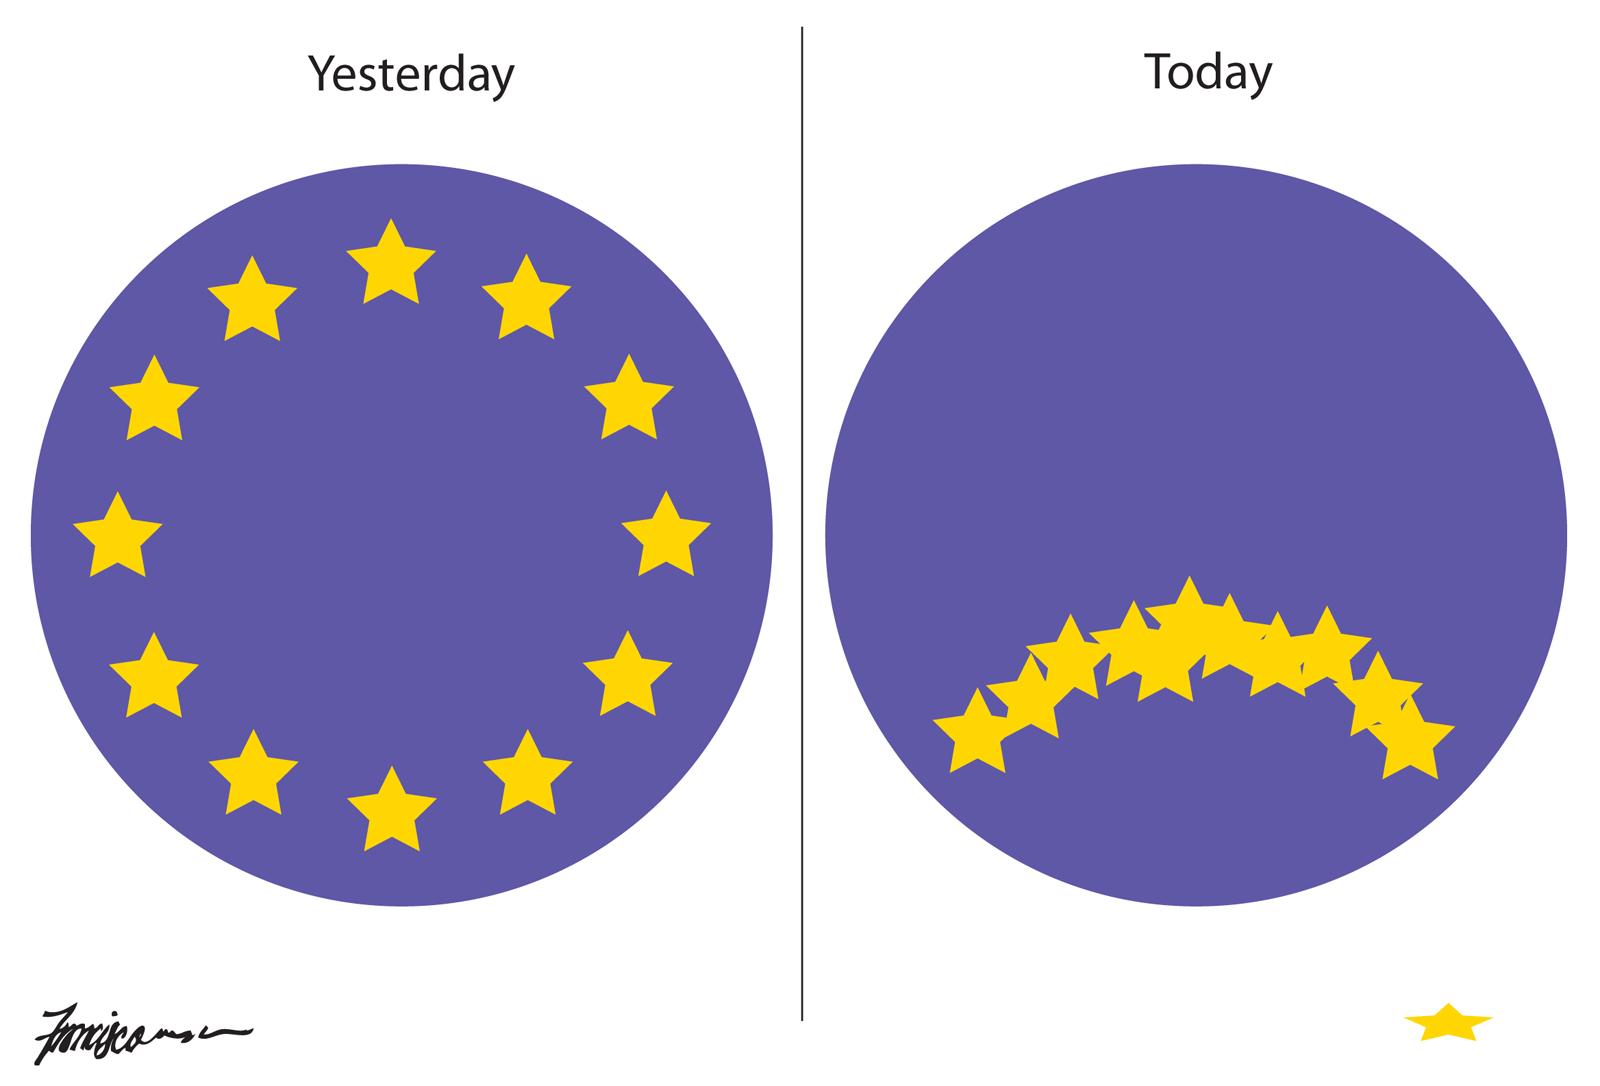 The circle of stars on the European Union's flag turn into a frowny face after Brexit vote